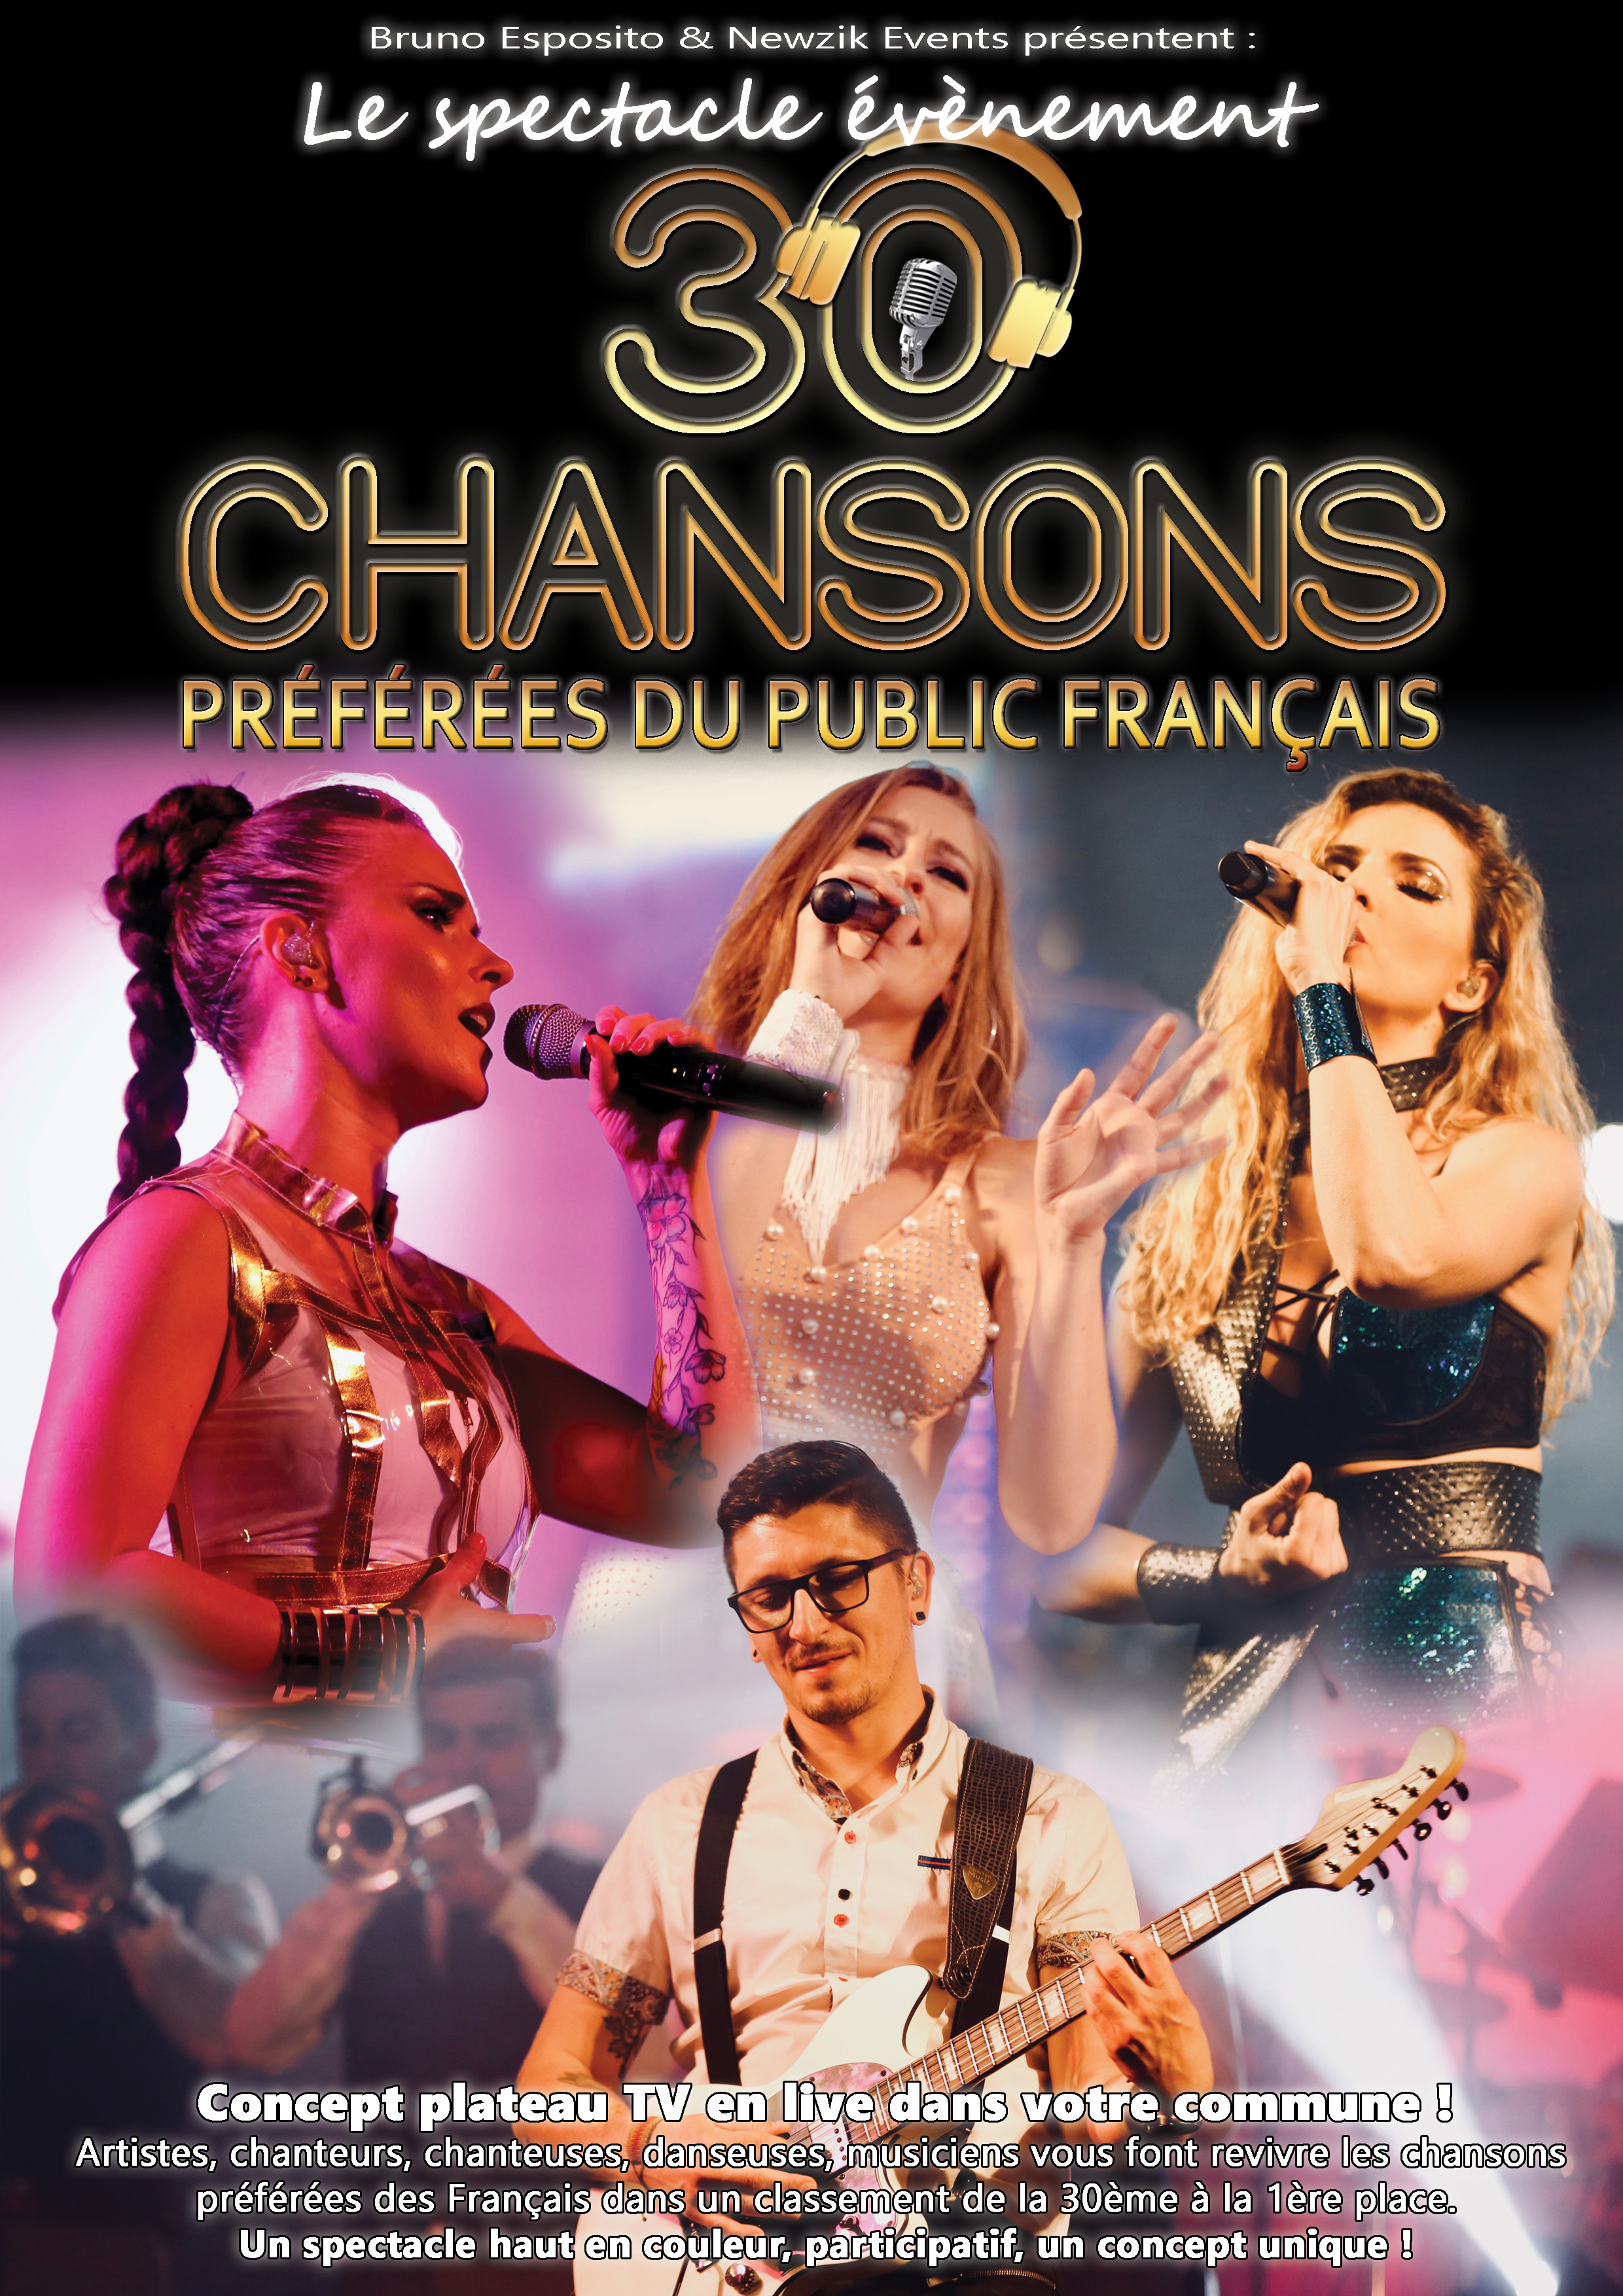 Spectacle 30 chansons